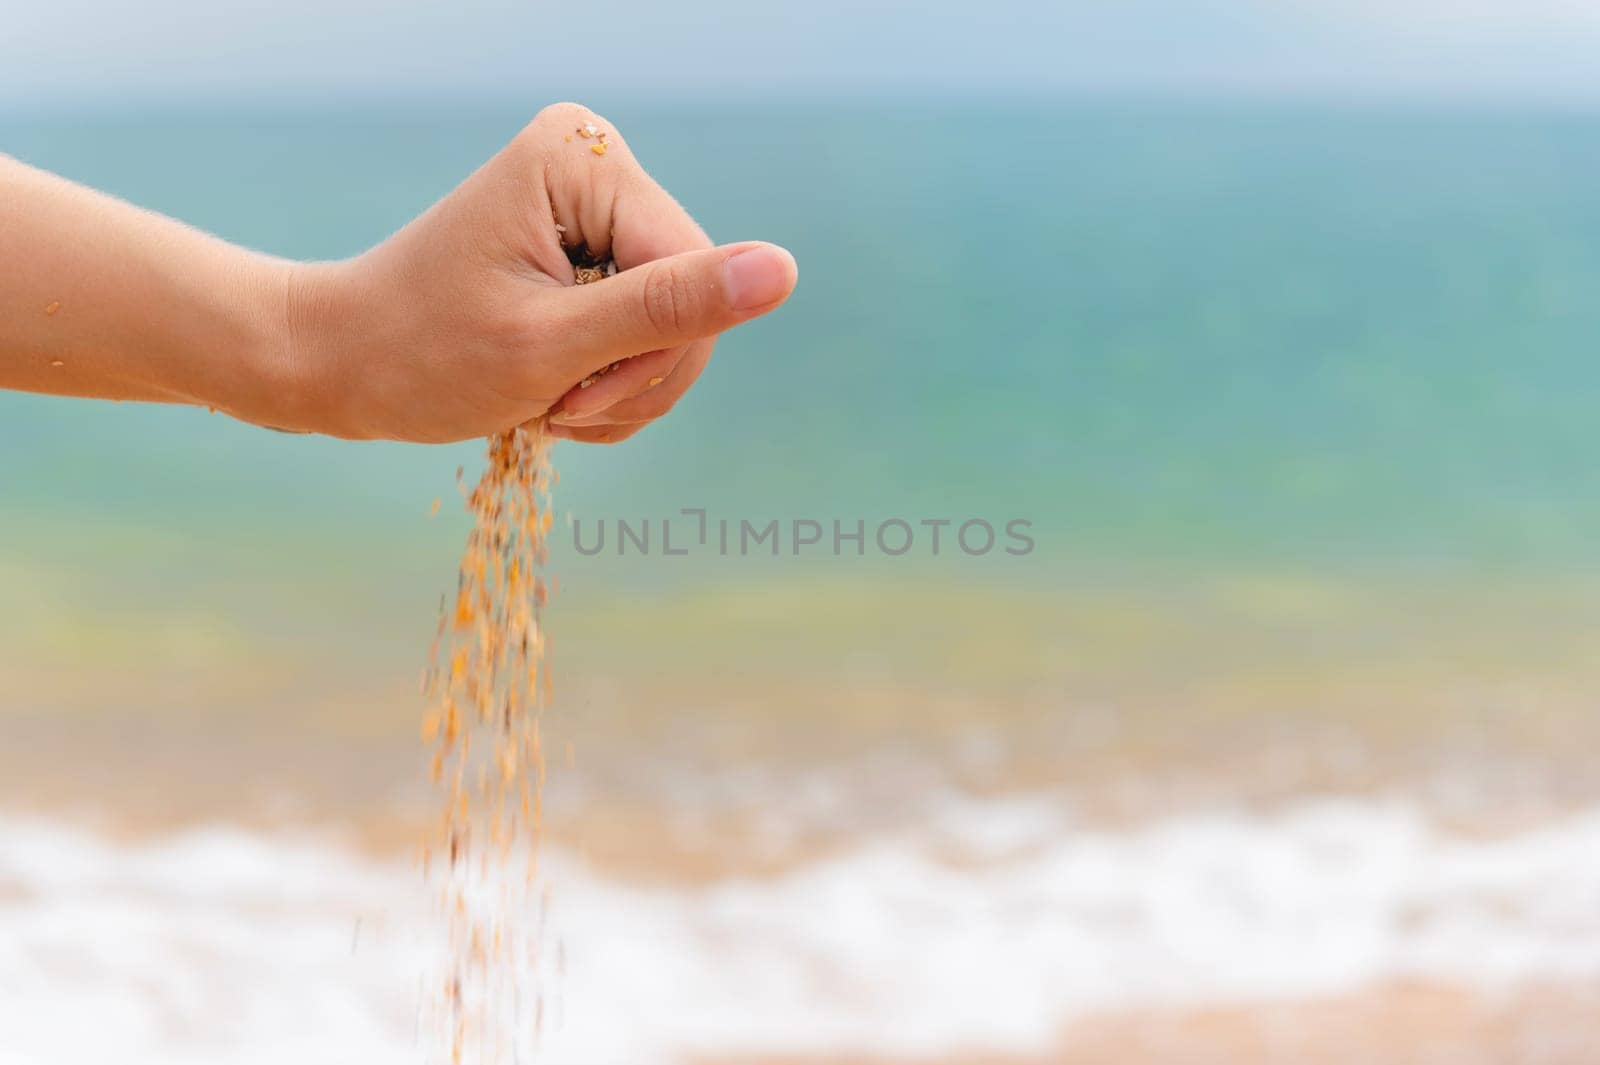 Close-up of a woman's hand releasing falling sand. Sand flows through the hand against the backdrop of the turquoise sea. Summer beach holiday concept.